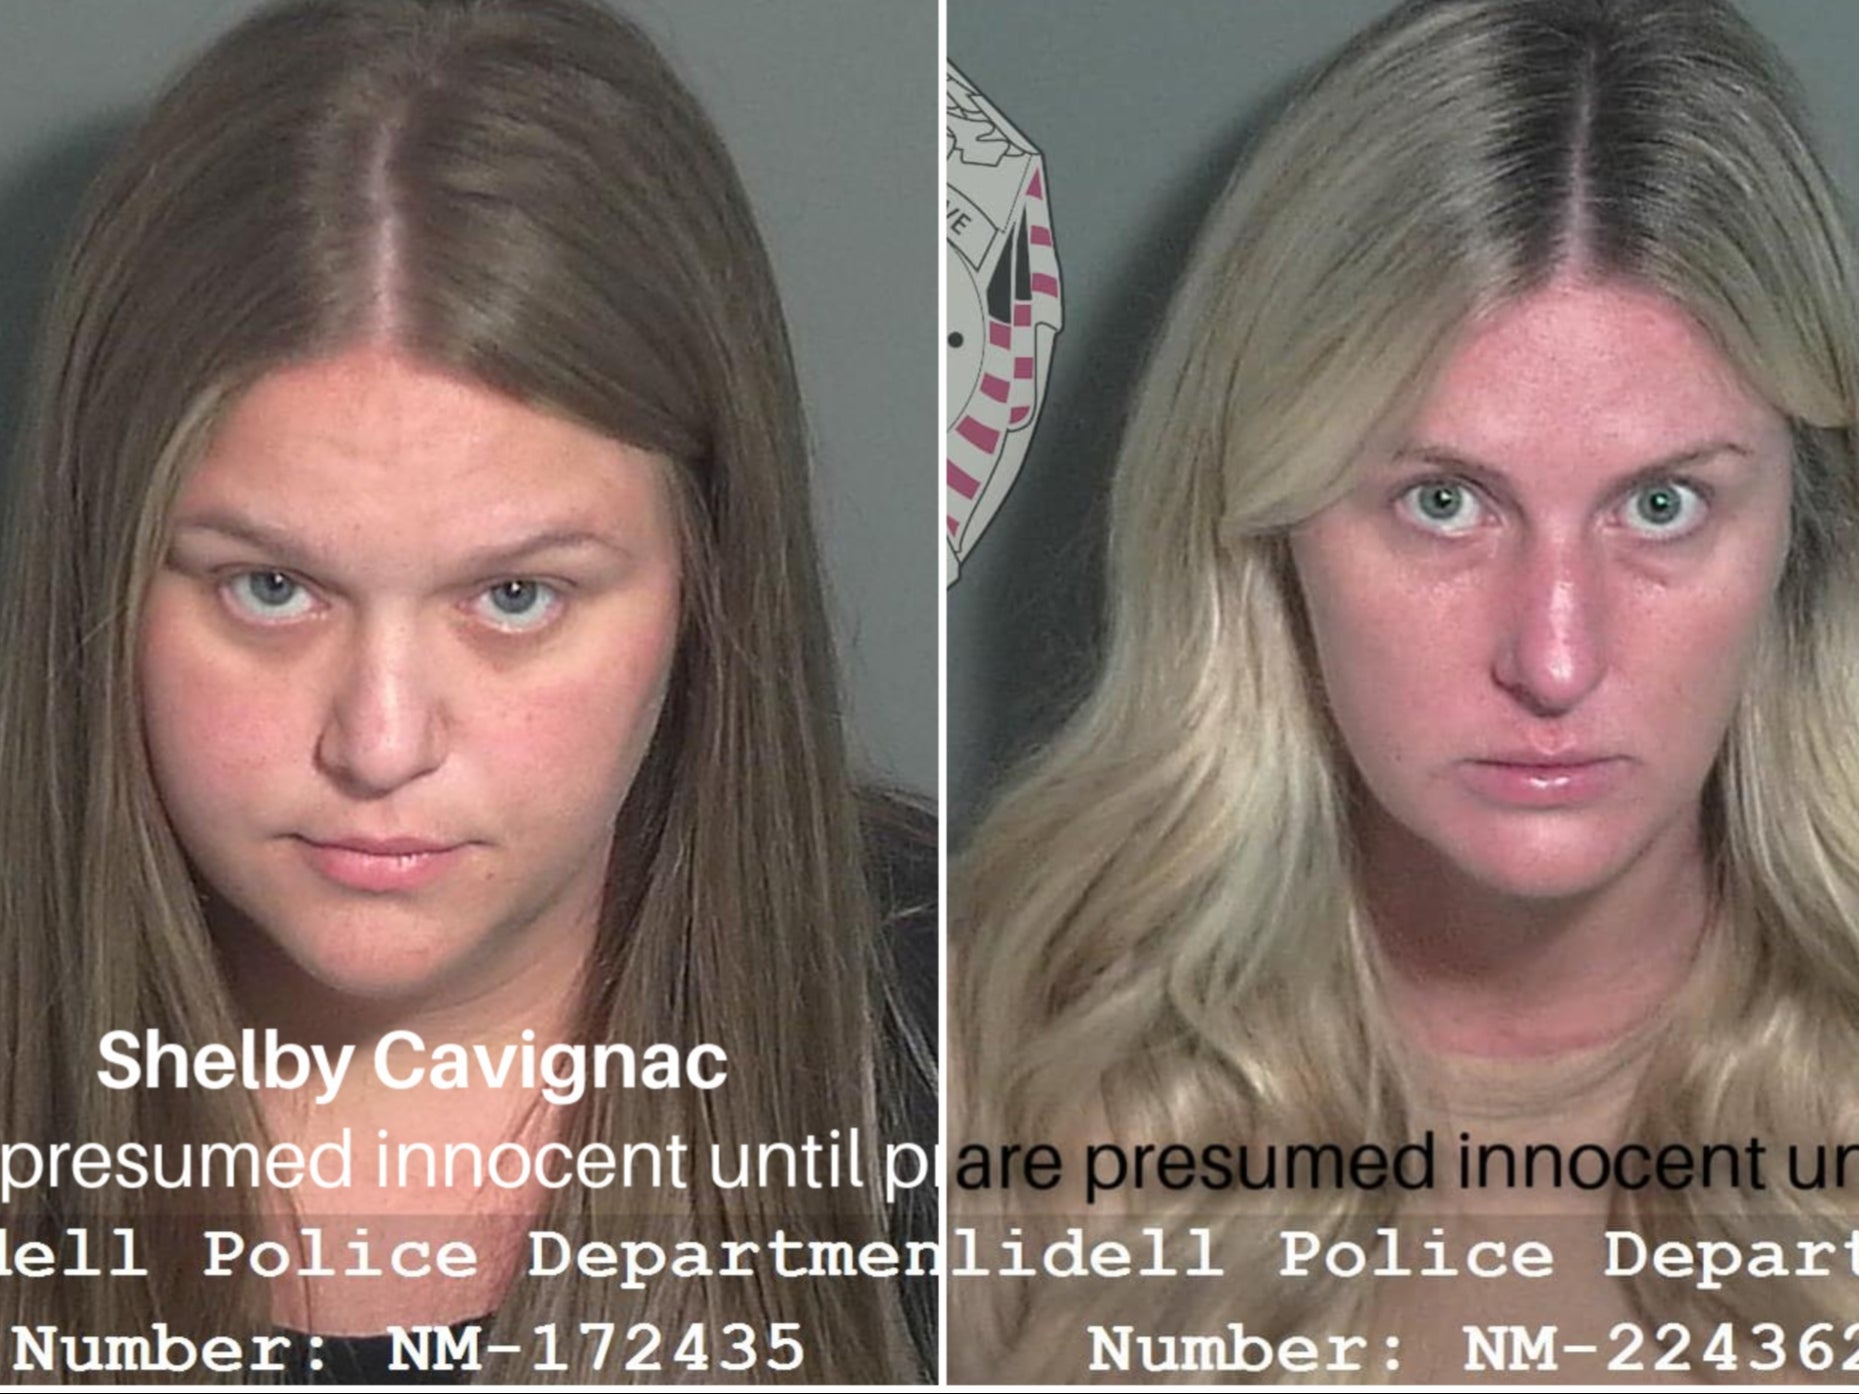 Alexa Wingerter, 35, and Shelby Cavignac, 31, two former teachers of Slidell High School have been arrested on charges of prohibited sexual conduct between an educator and student